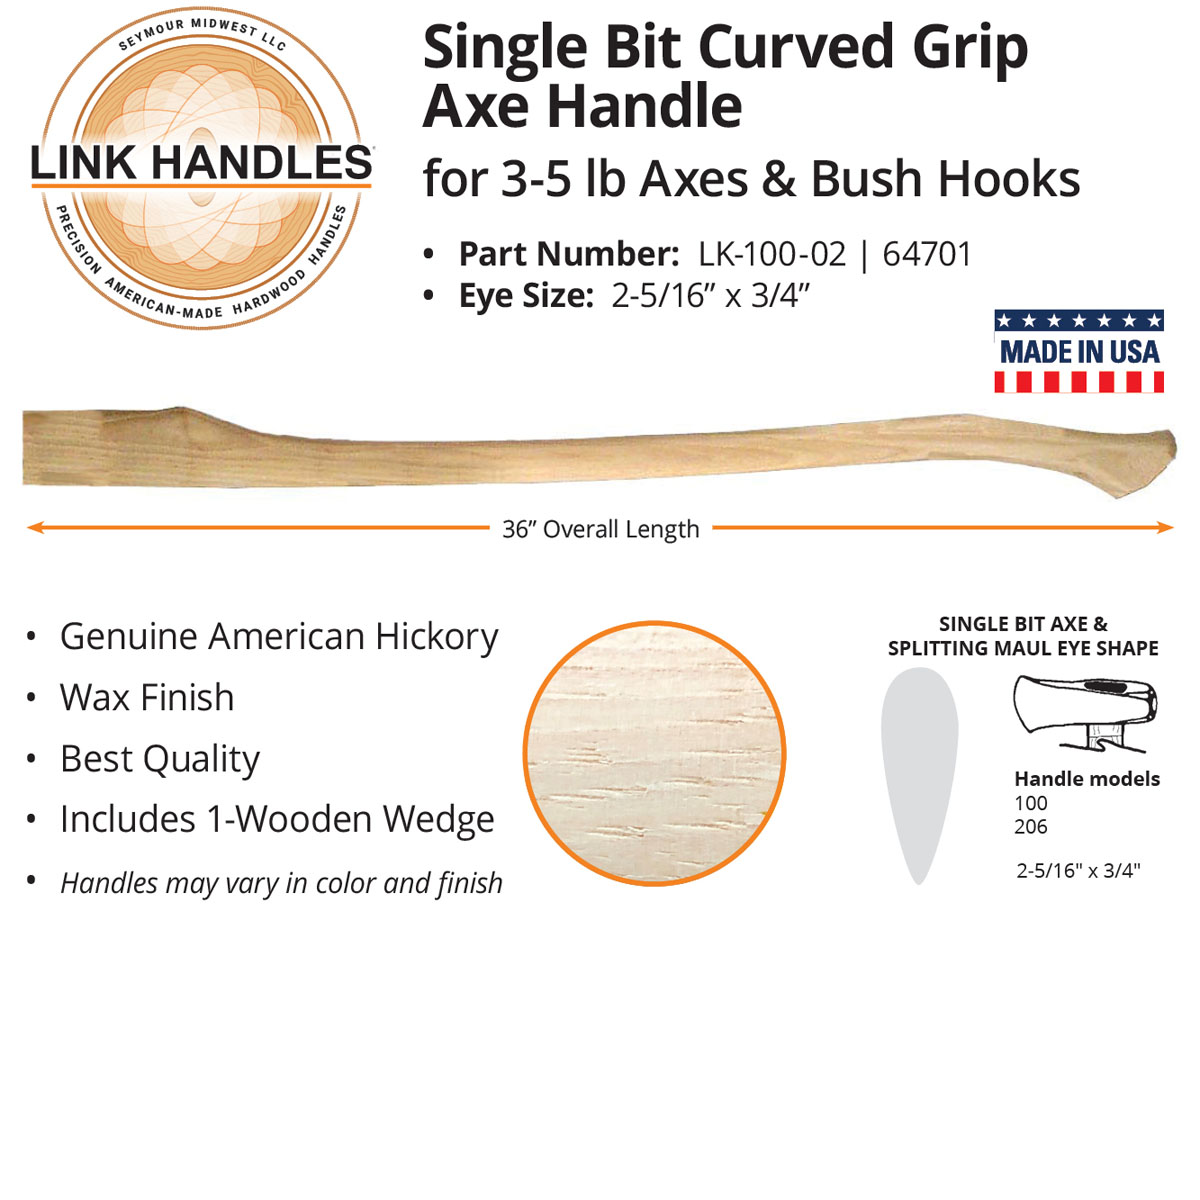 SEYMOUR MIDWEST LINK 64890 Axe Curved Grip Handle,32",Wax,Home 